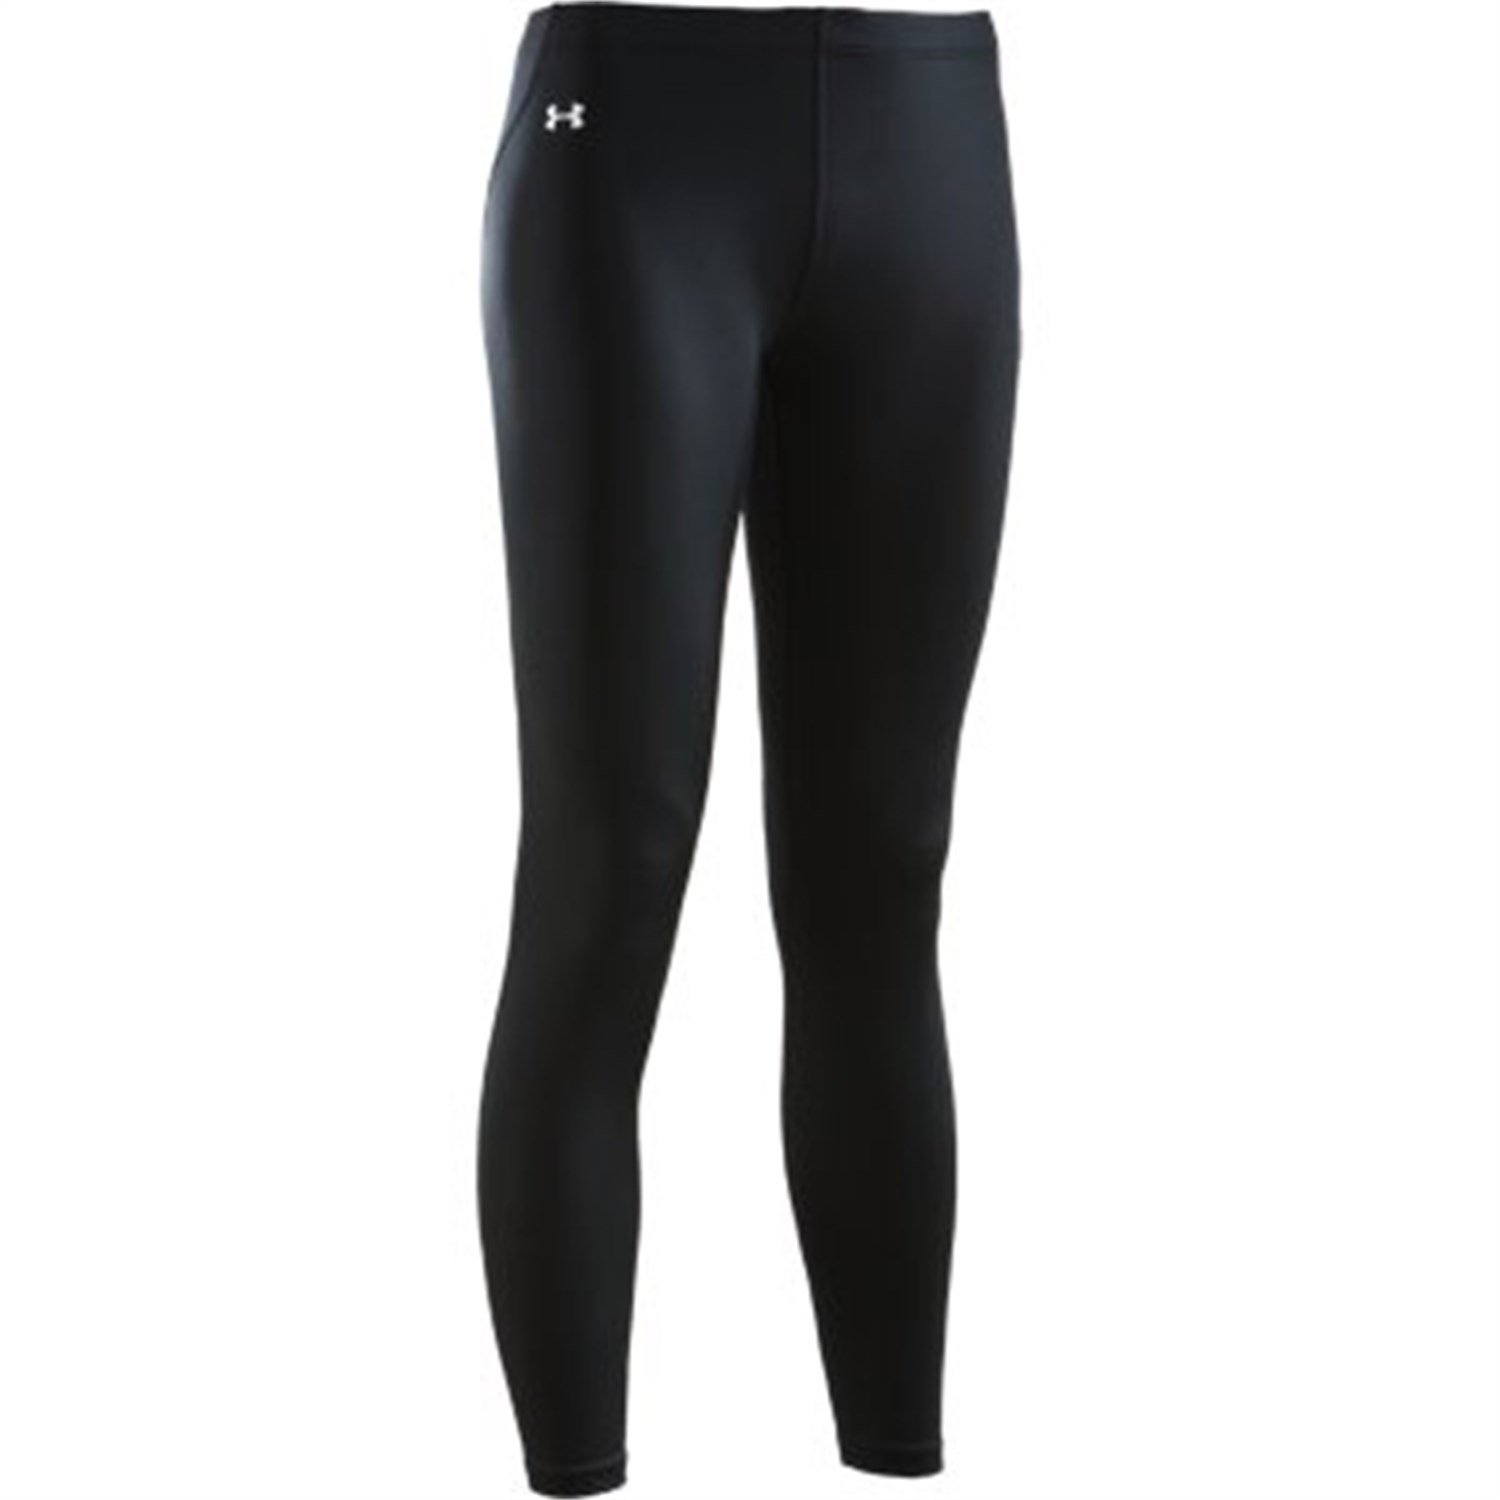 Under Armour Evo CG Tights - Women's | evo outlet